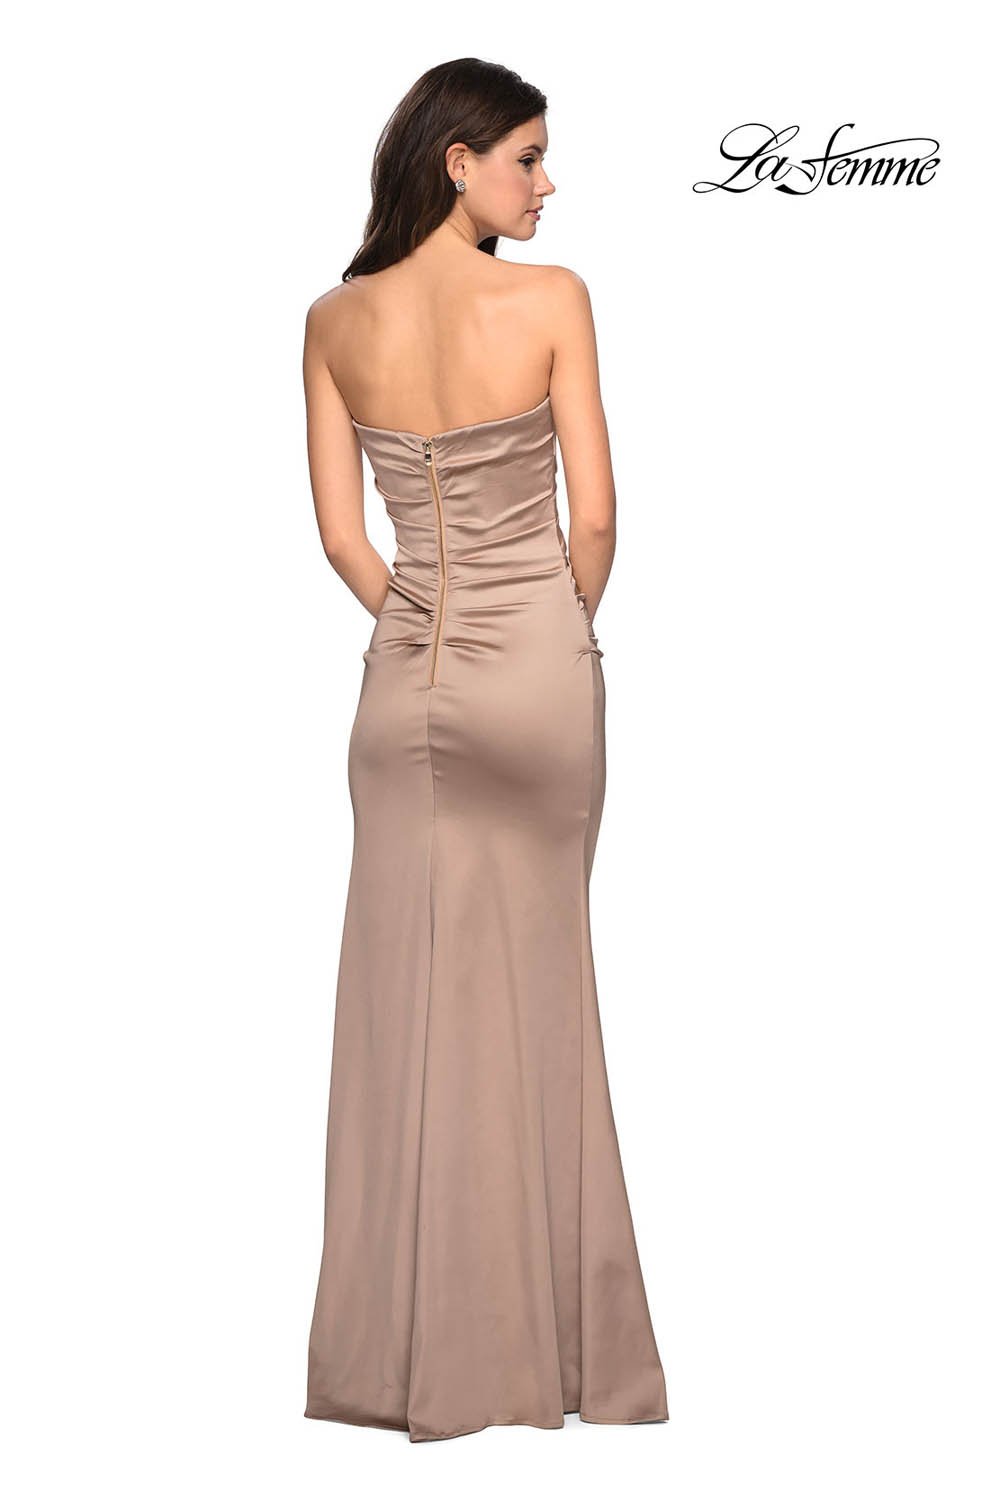 La Femme 27780 dress images in these colors: Forest Green, Fuchsia, Gold.